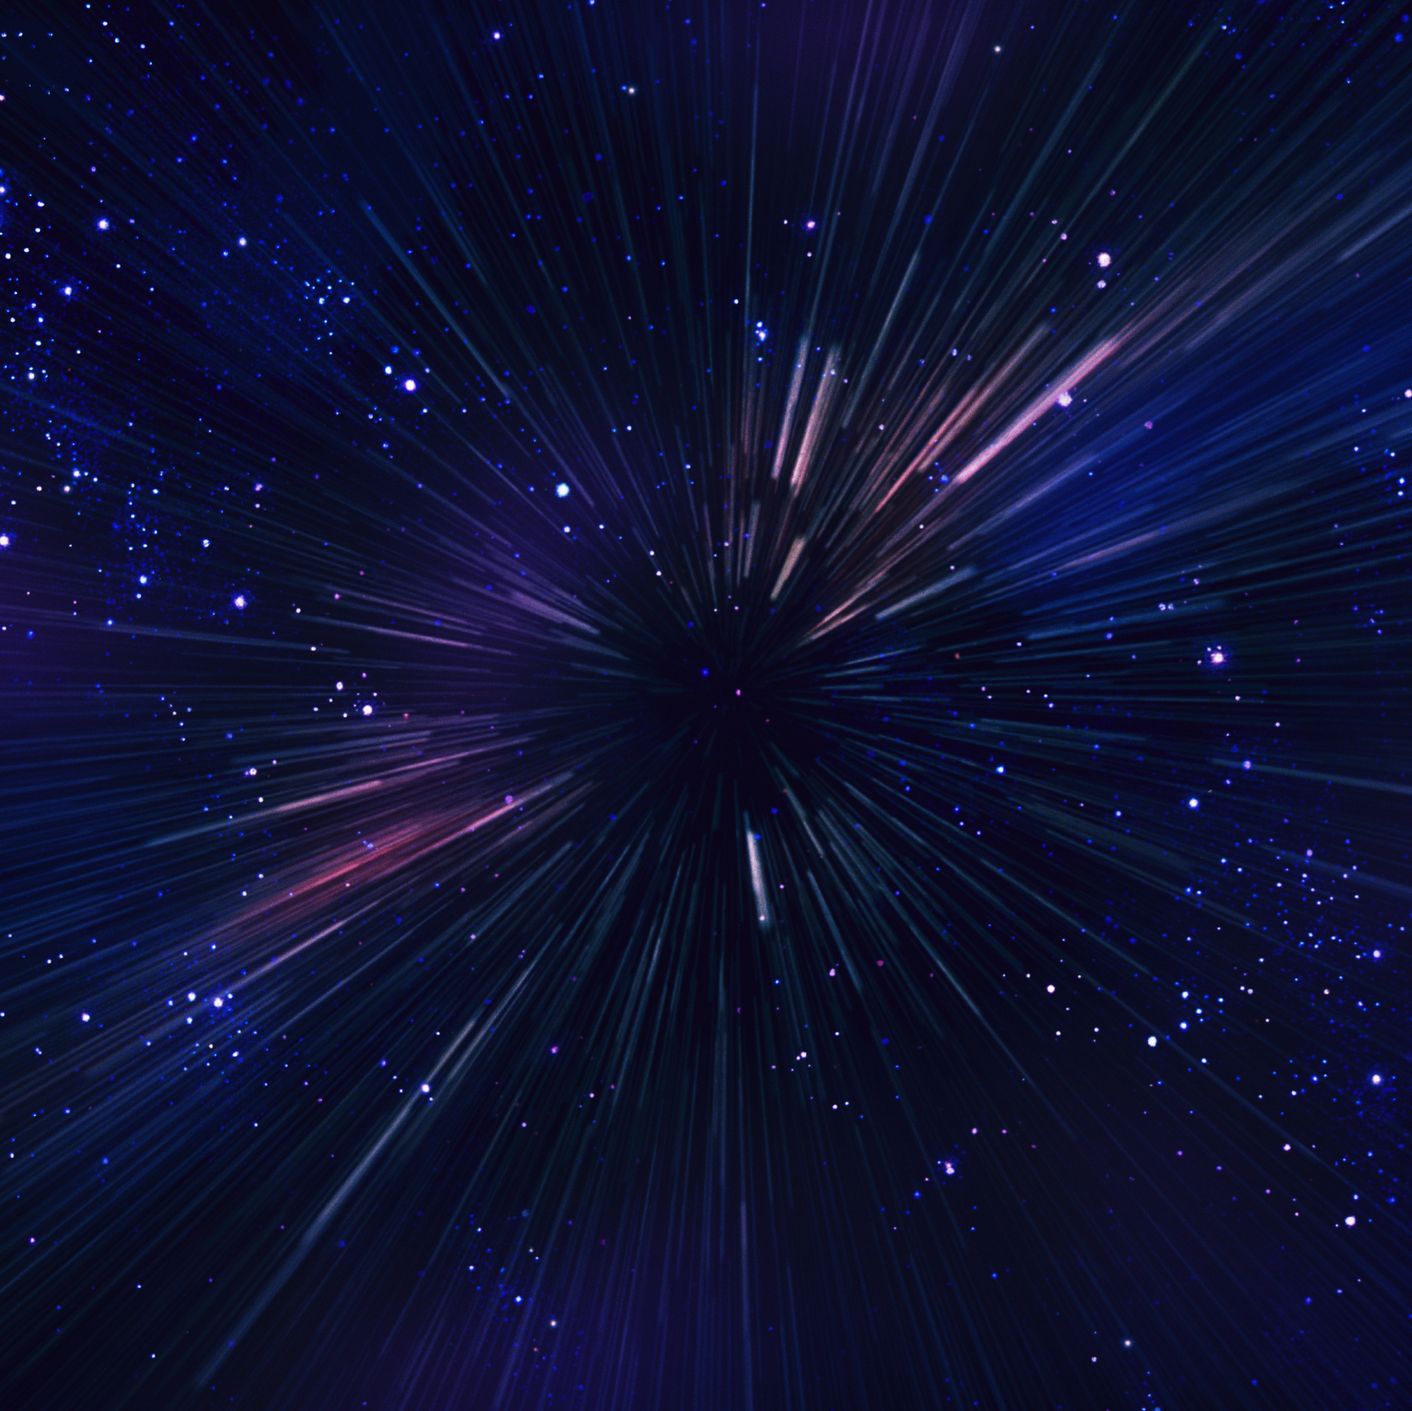 There's a Theoretical Limit to How Fast Warp Speed Really Could Be